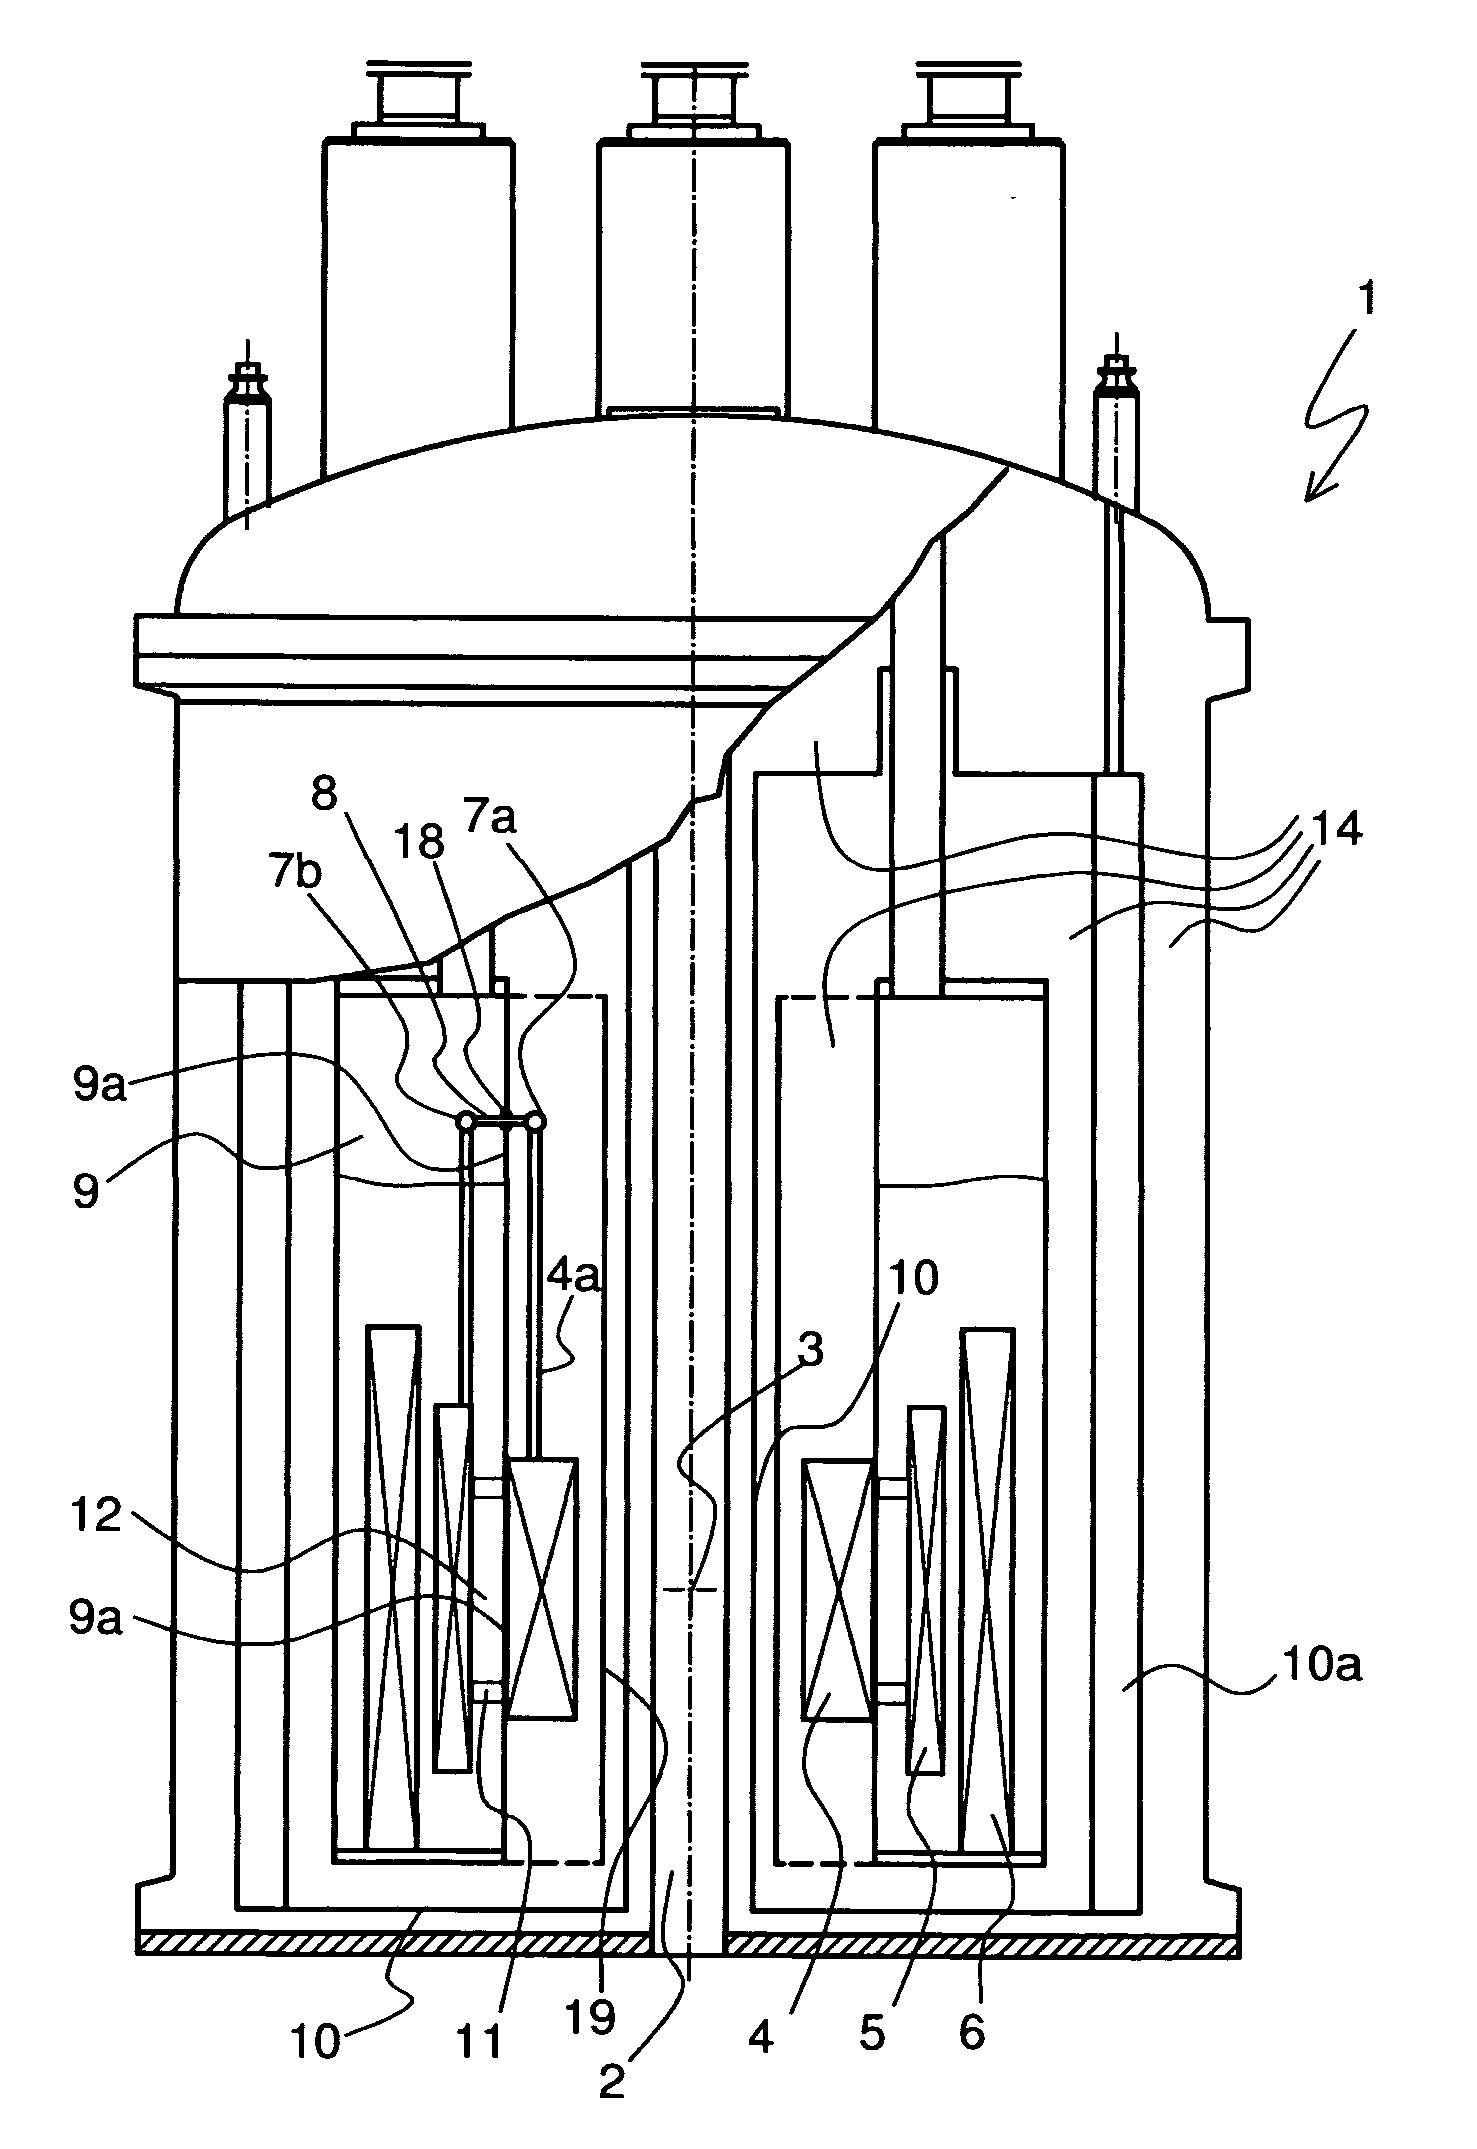 Cryostat Having A Magnet Coil System, Which Comprises An Lts Section And An Hts Section, Which Is Arranged In The Vacuum Part